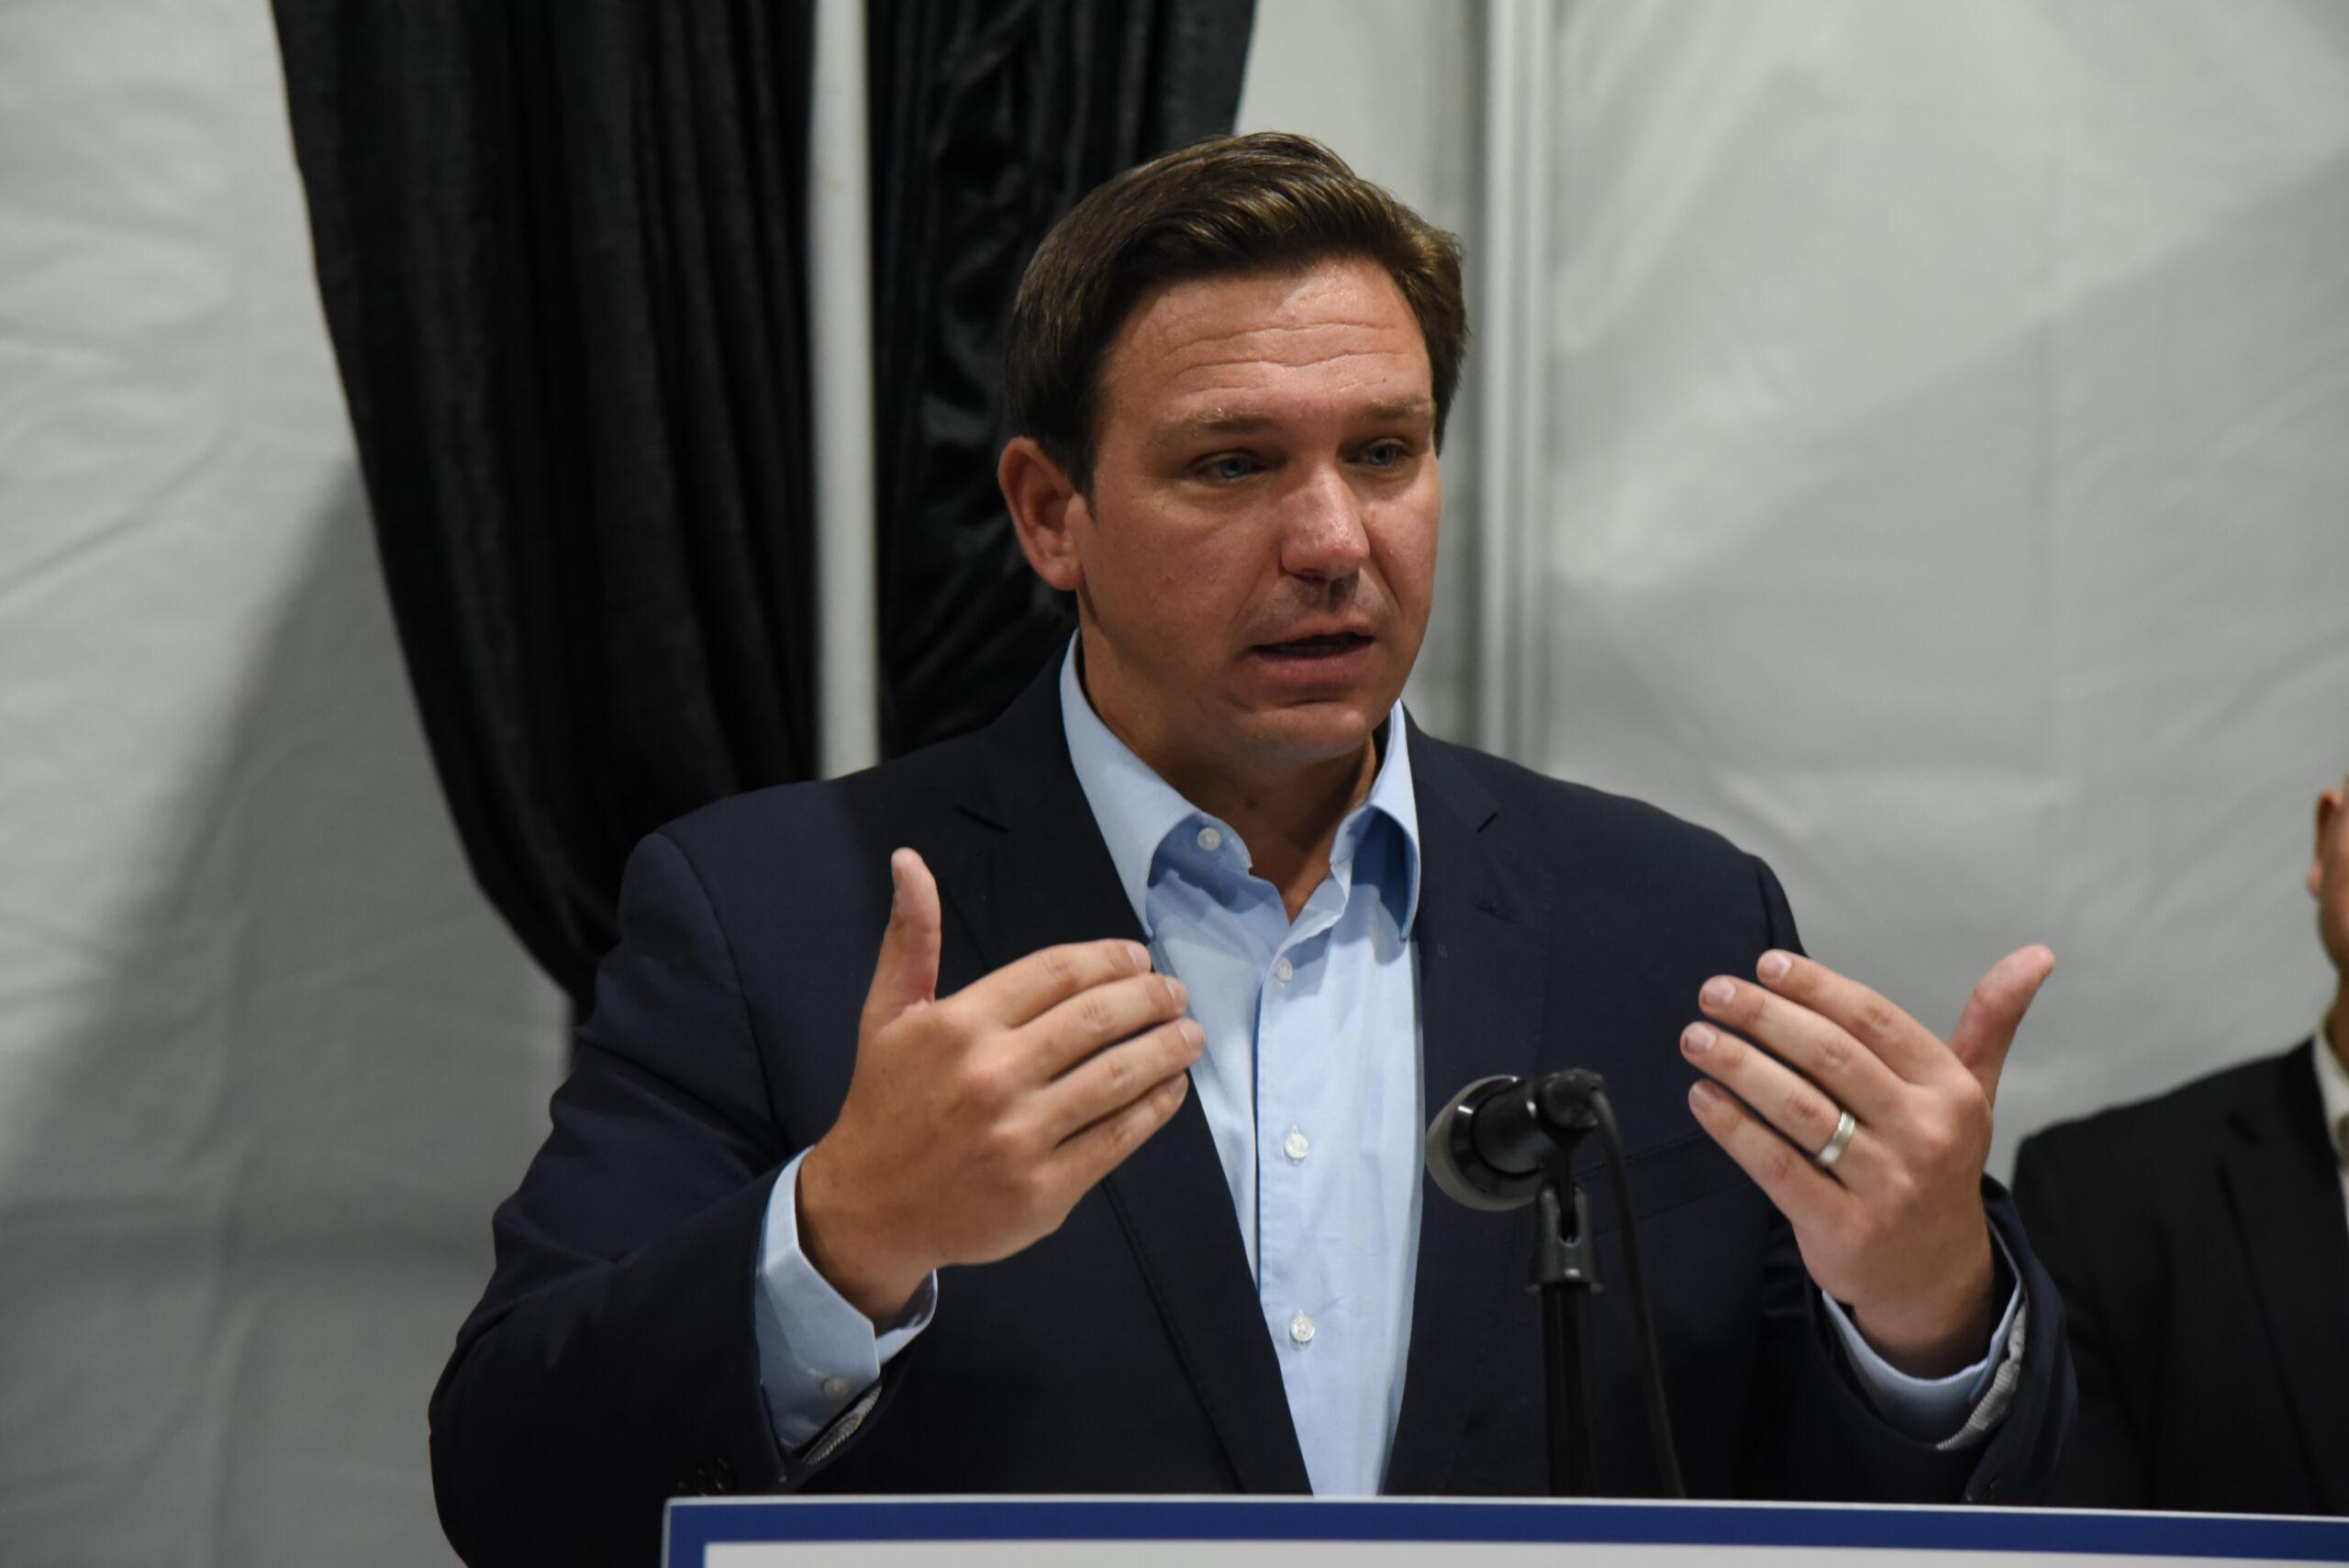 Gov DeSantis Announce at a News Conference the Opening Monoclonal Antibody Treatment Center in Pembroke Pines